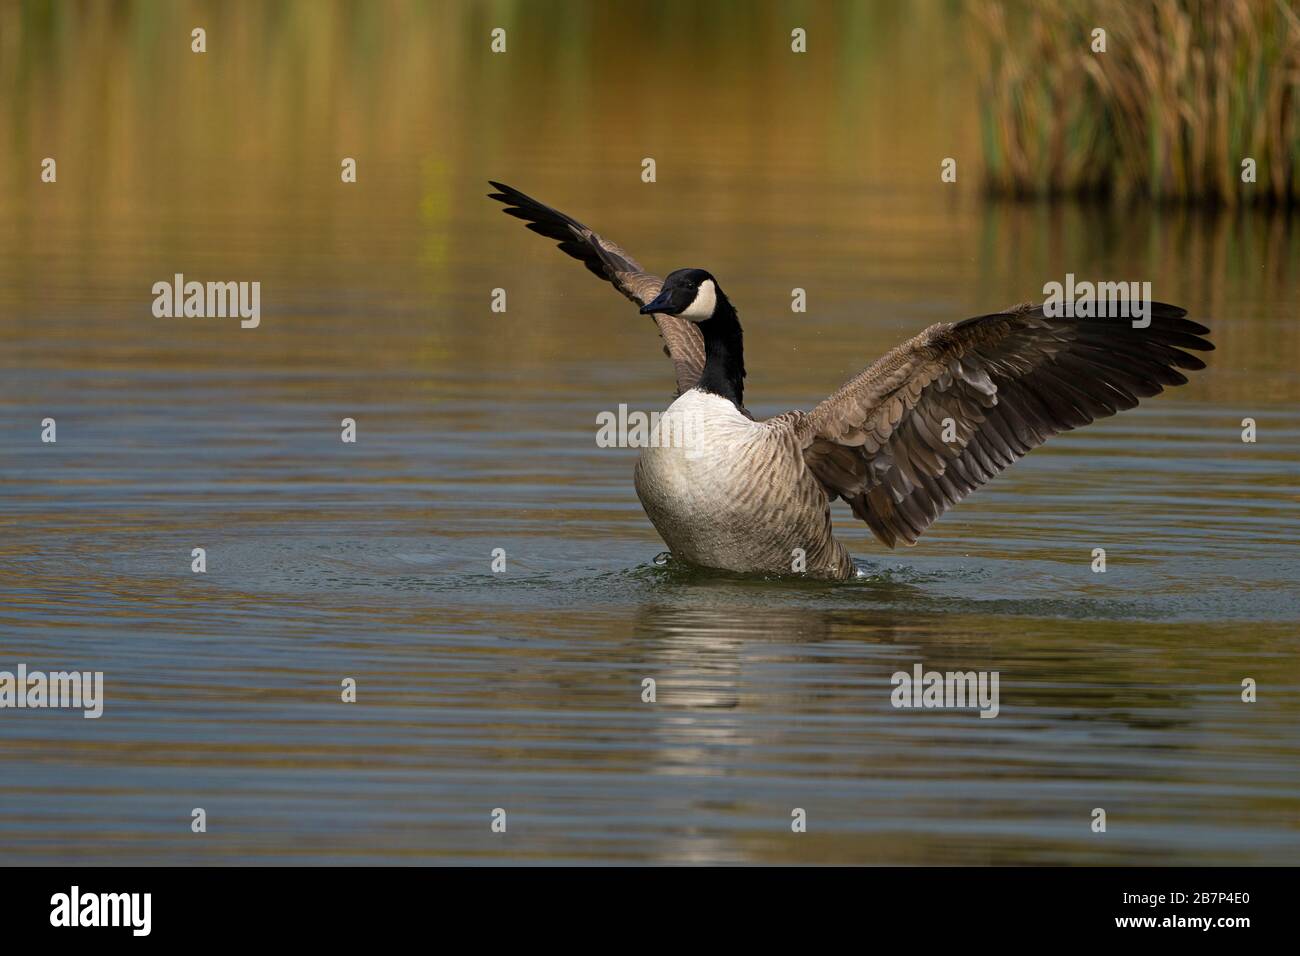 Canada Goose-Branta canadensis flaps its wings. Stock Photo